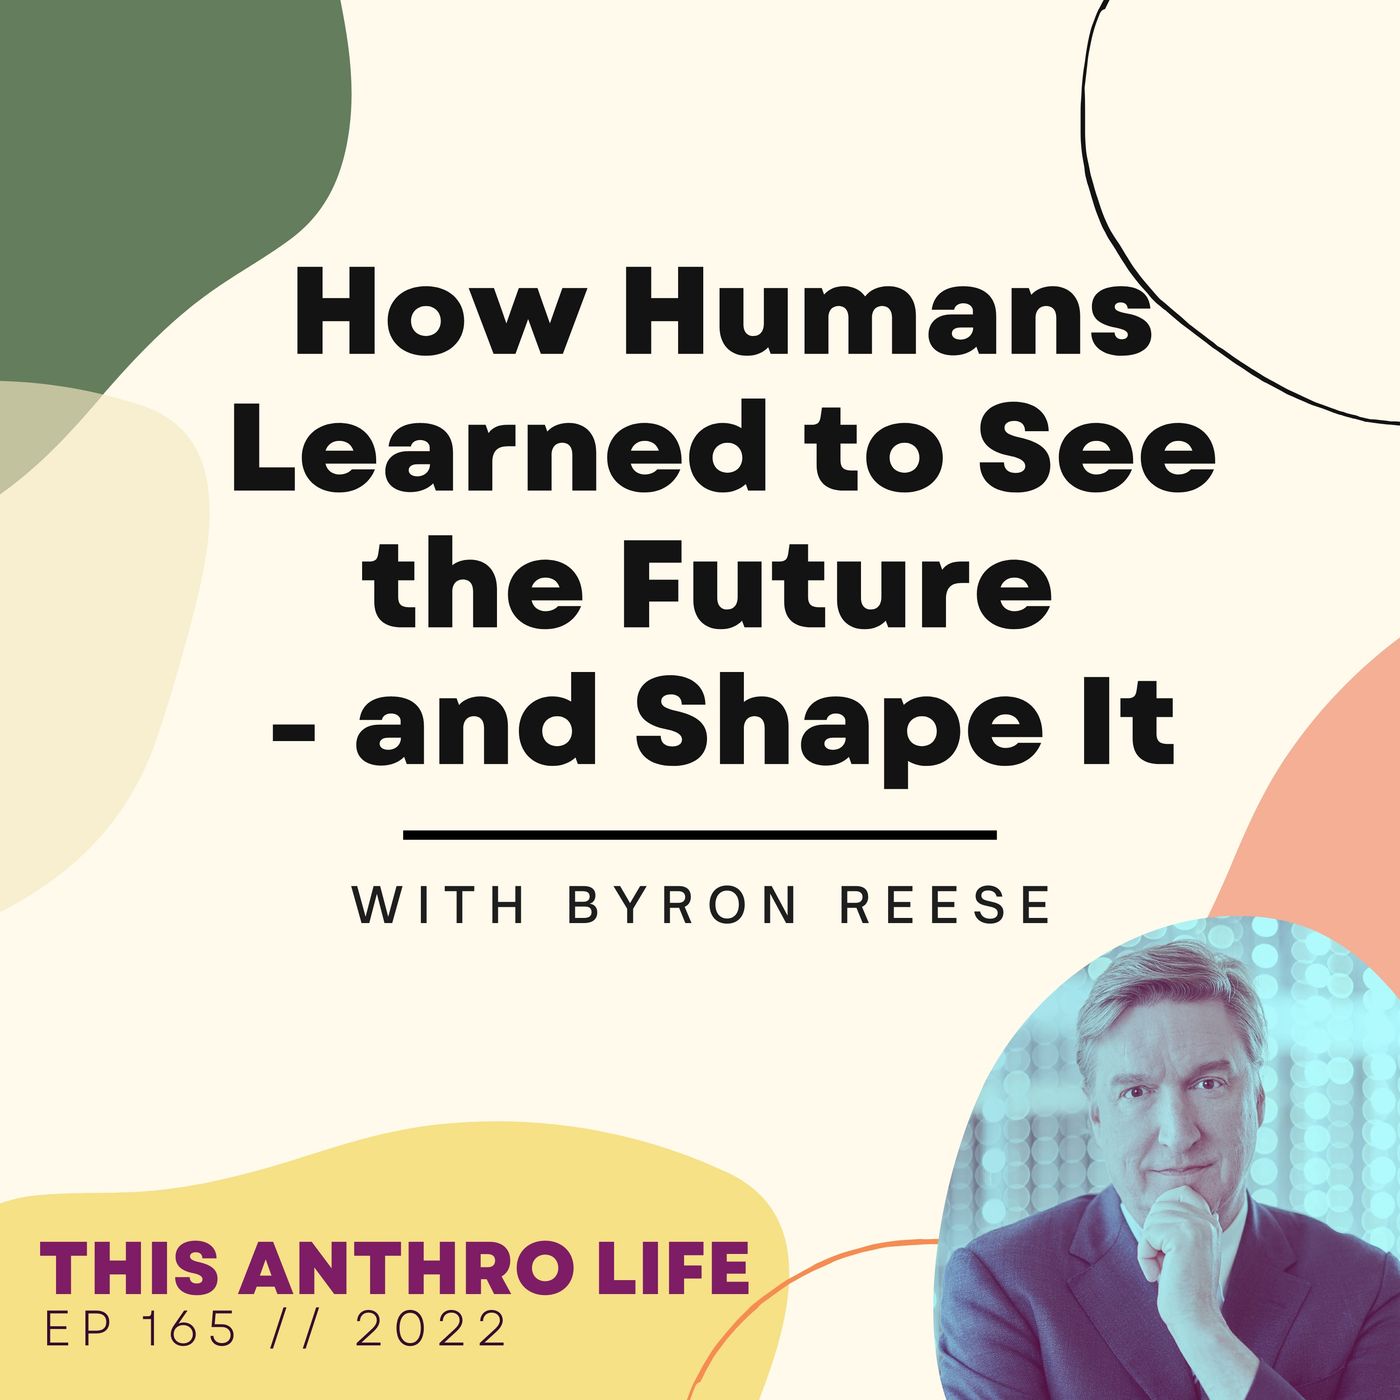 How Humans Learned to See the Future with Byron Reese Image